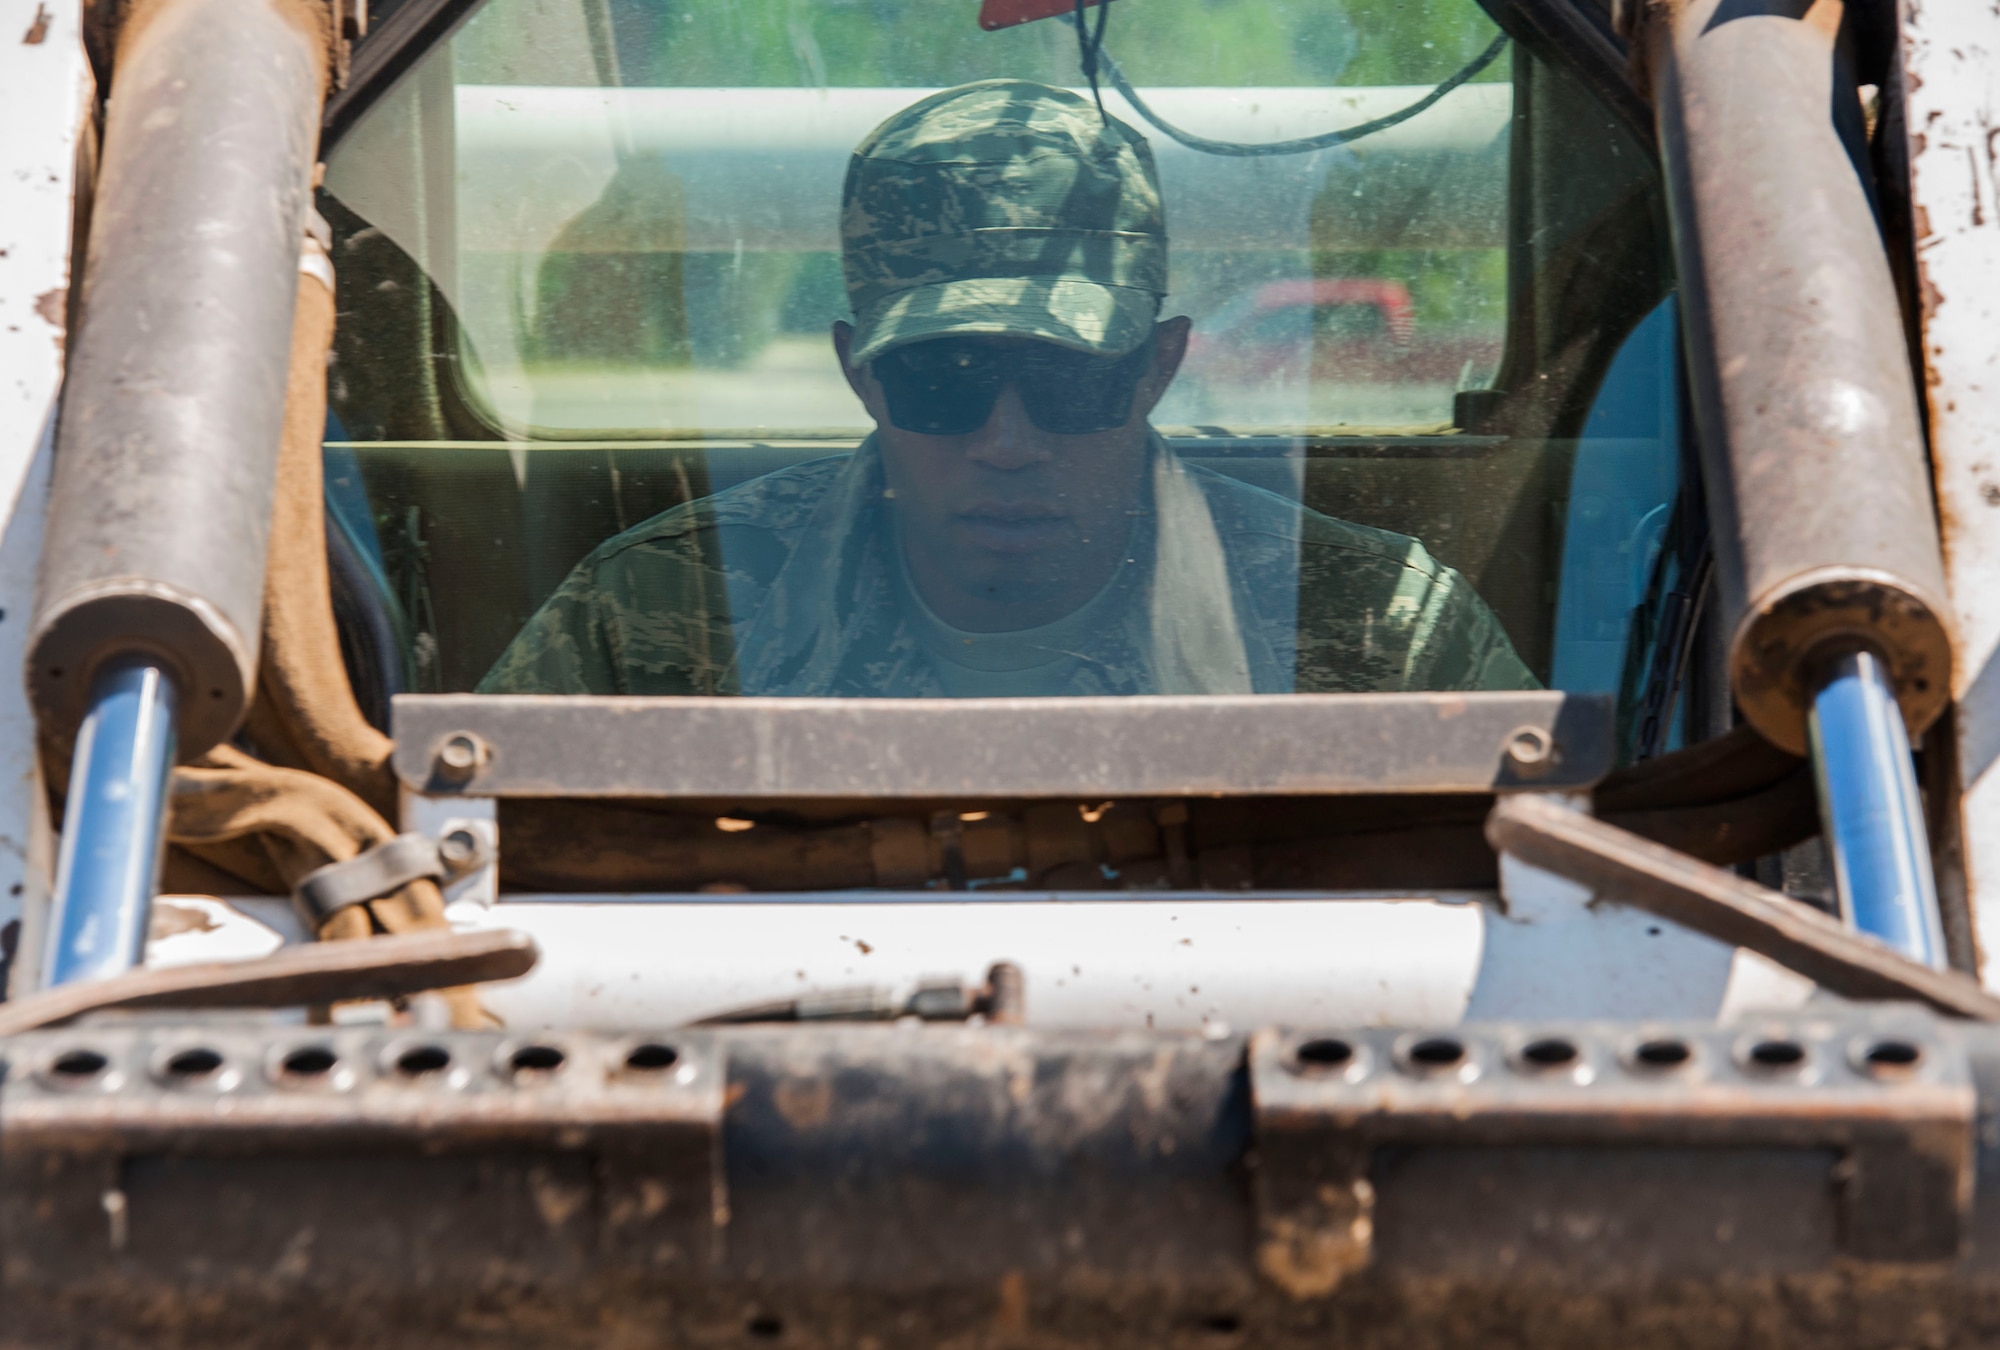 Airman 1st Class Harold McIntyre, 5th Civil Engineer Squadron pavements and equipment technician, operates a loader at Minot Air Force Base, N.D., June 12, 2017. After assessing which sections of sidewalk needed to be removed, the CES Airmen made relief cuts to the cracked concrete before replacing it. (U.S. Air Force photo by Airman 1st Class Jonathan McElderry)